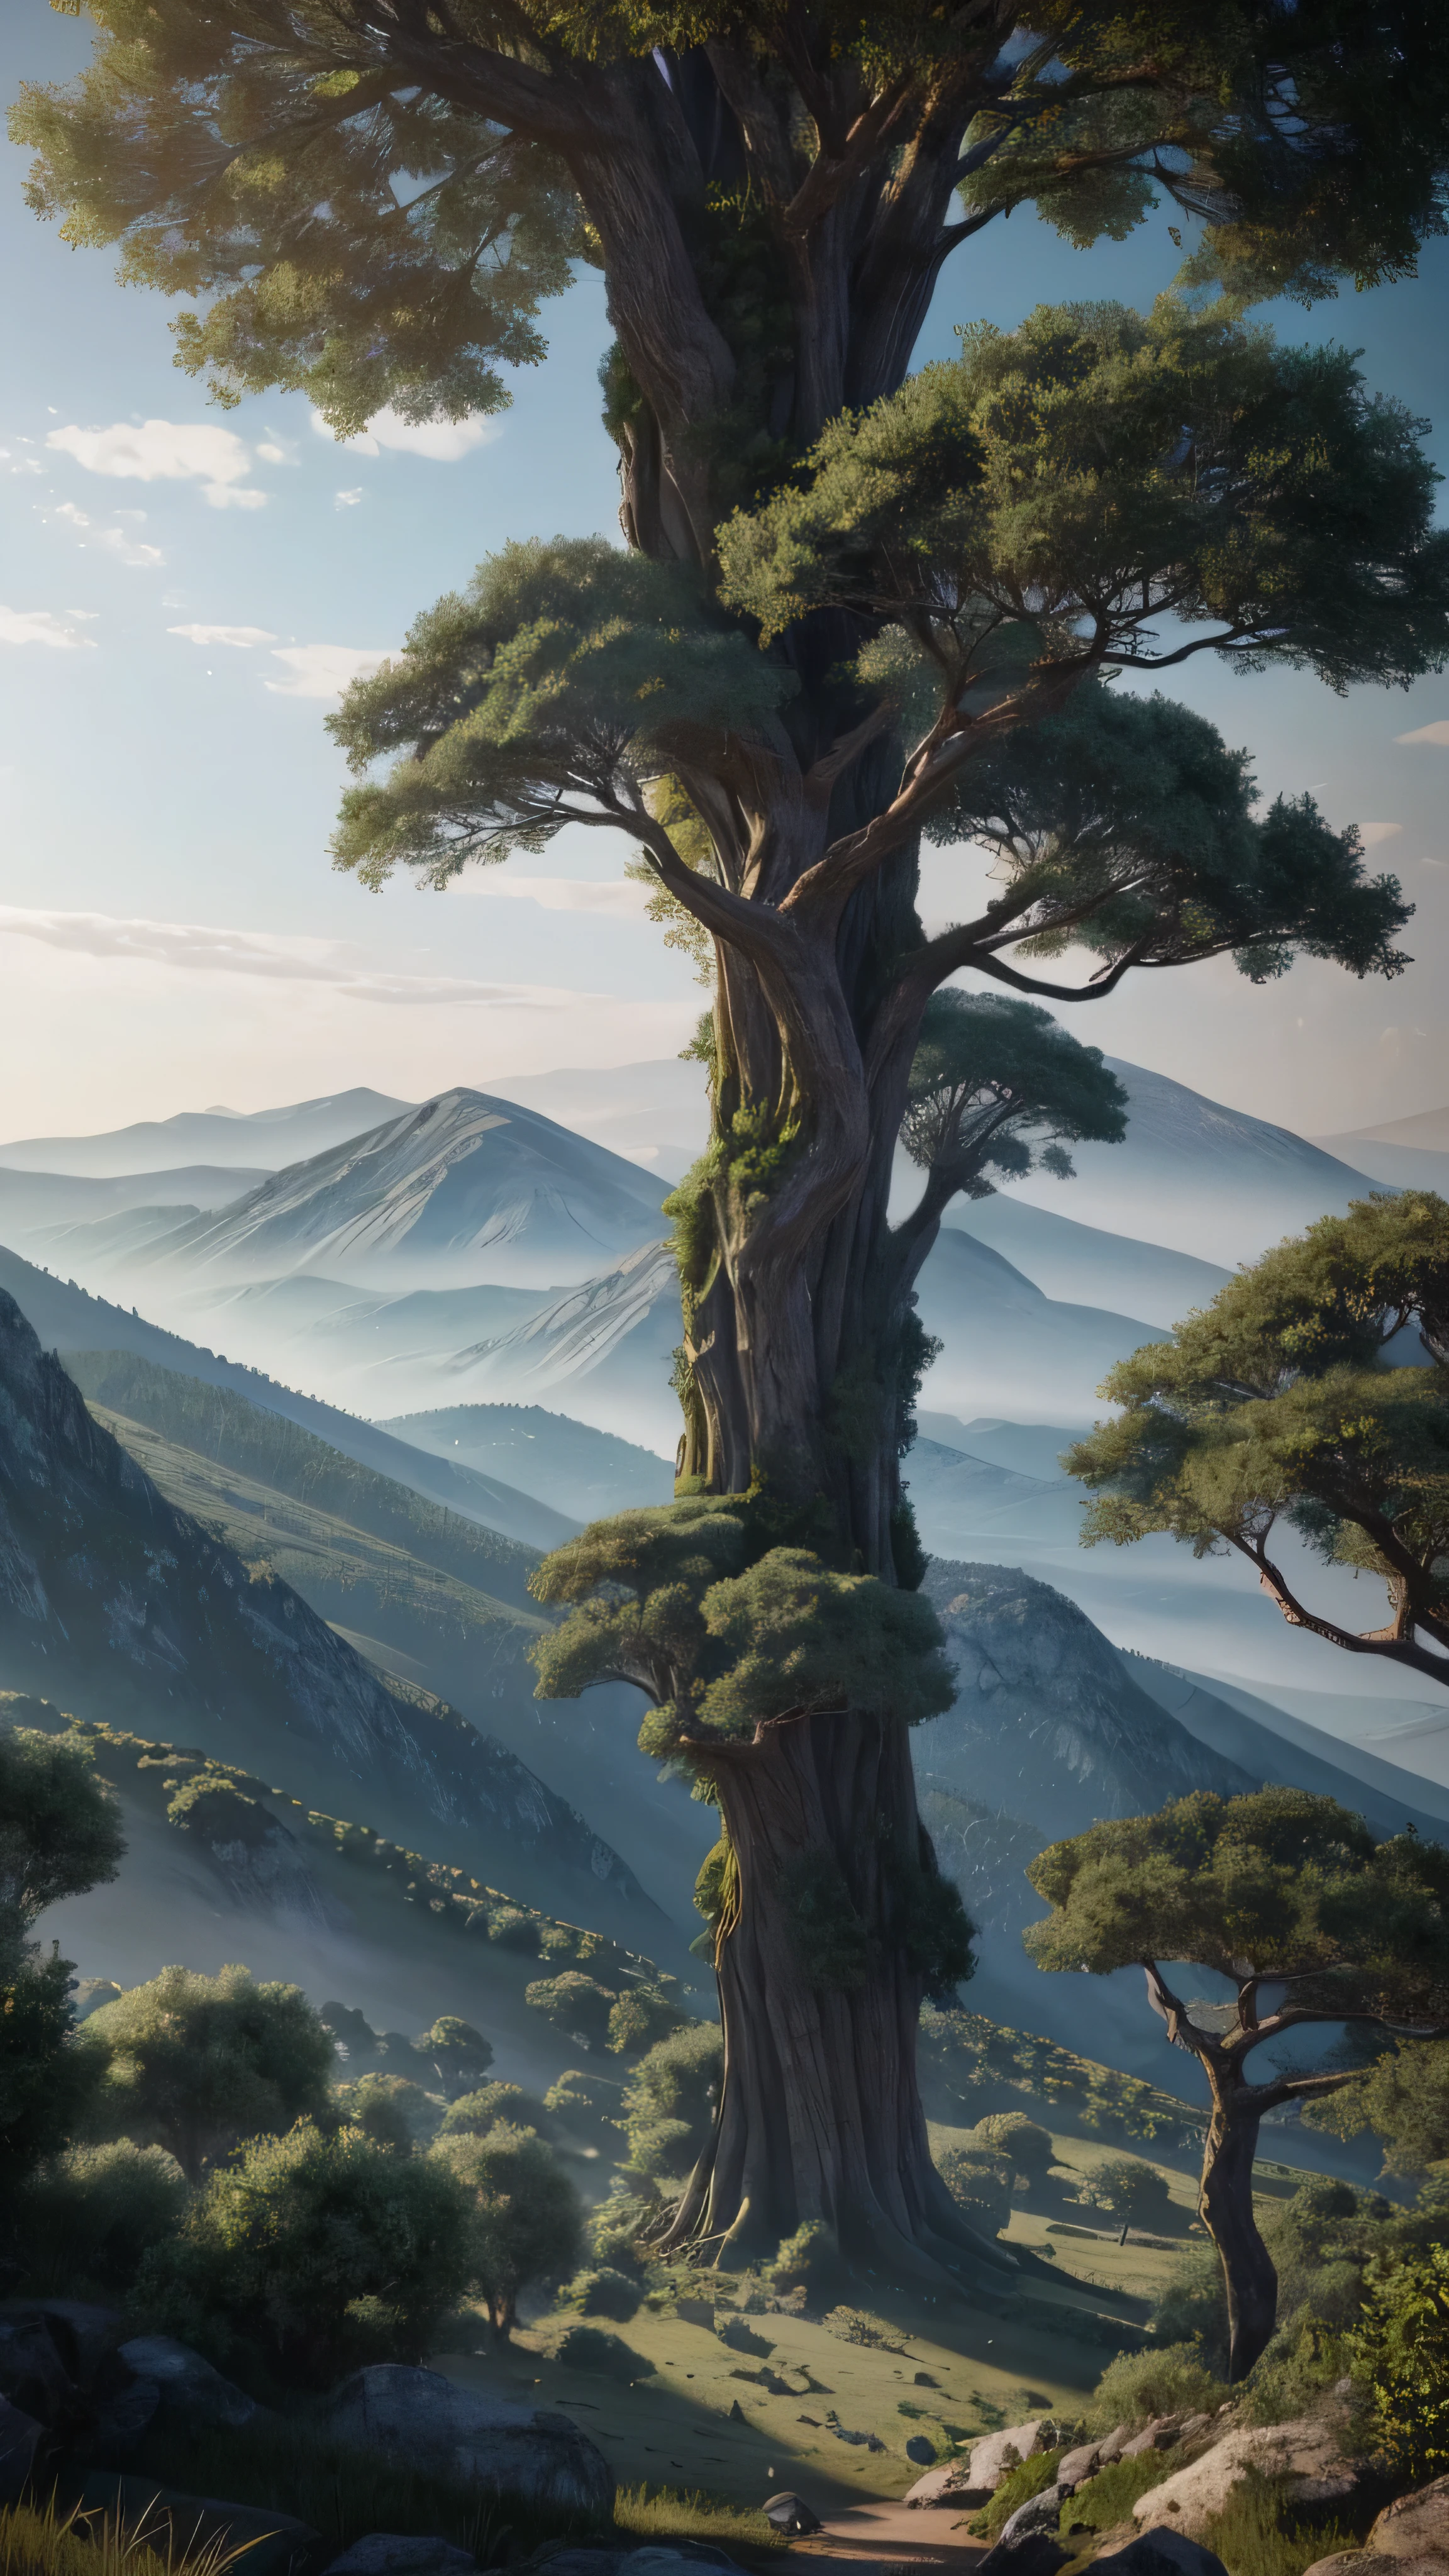 Zebaoth, an awe-inspiring epic fantasy tree of colossal stature, towers amidst the majestic panorama of ancient mountains. The cinematic lens captures the grandeur of the scene in a wide-angle view, offering a realistic and detailed portrayal of the tree's intricate bark and the diverse hues of its sprawling foliage. With a resolution of 8k, this breathtaking artwork is currently trending on ArtStation, showcasing the smooth, fluid movements of the 3D animation, framed in an aspect ratio of 2:1. The fine details of the tree's skin-like texture and the rough, rug